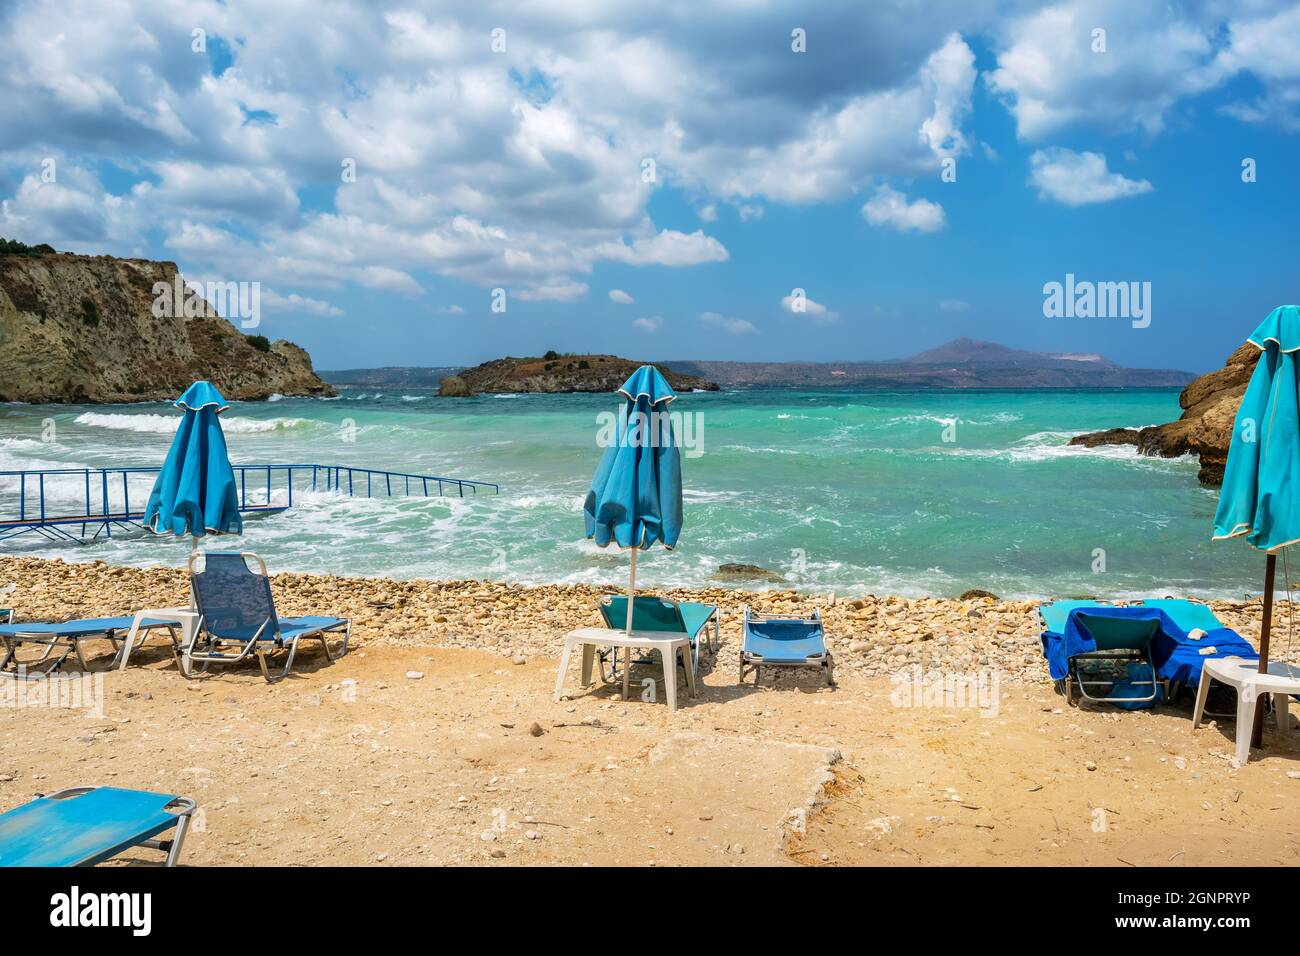 Sun loungers and close parasols on empty beach at stormy day. Almyrida. Crete, Greece Stock Photo